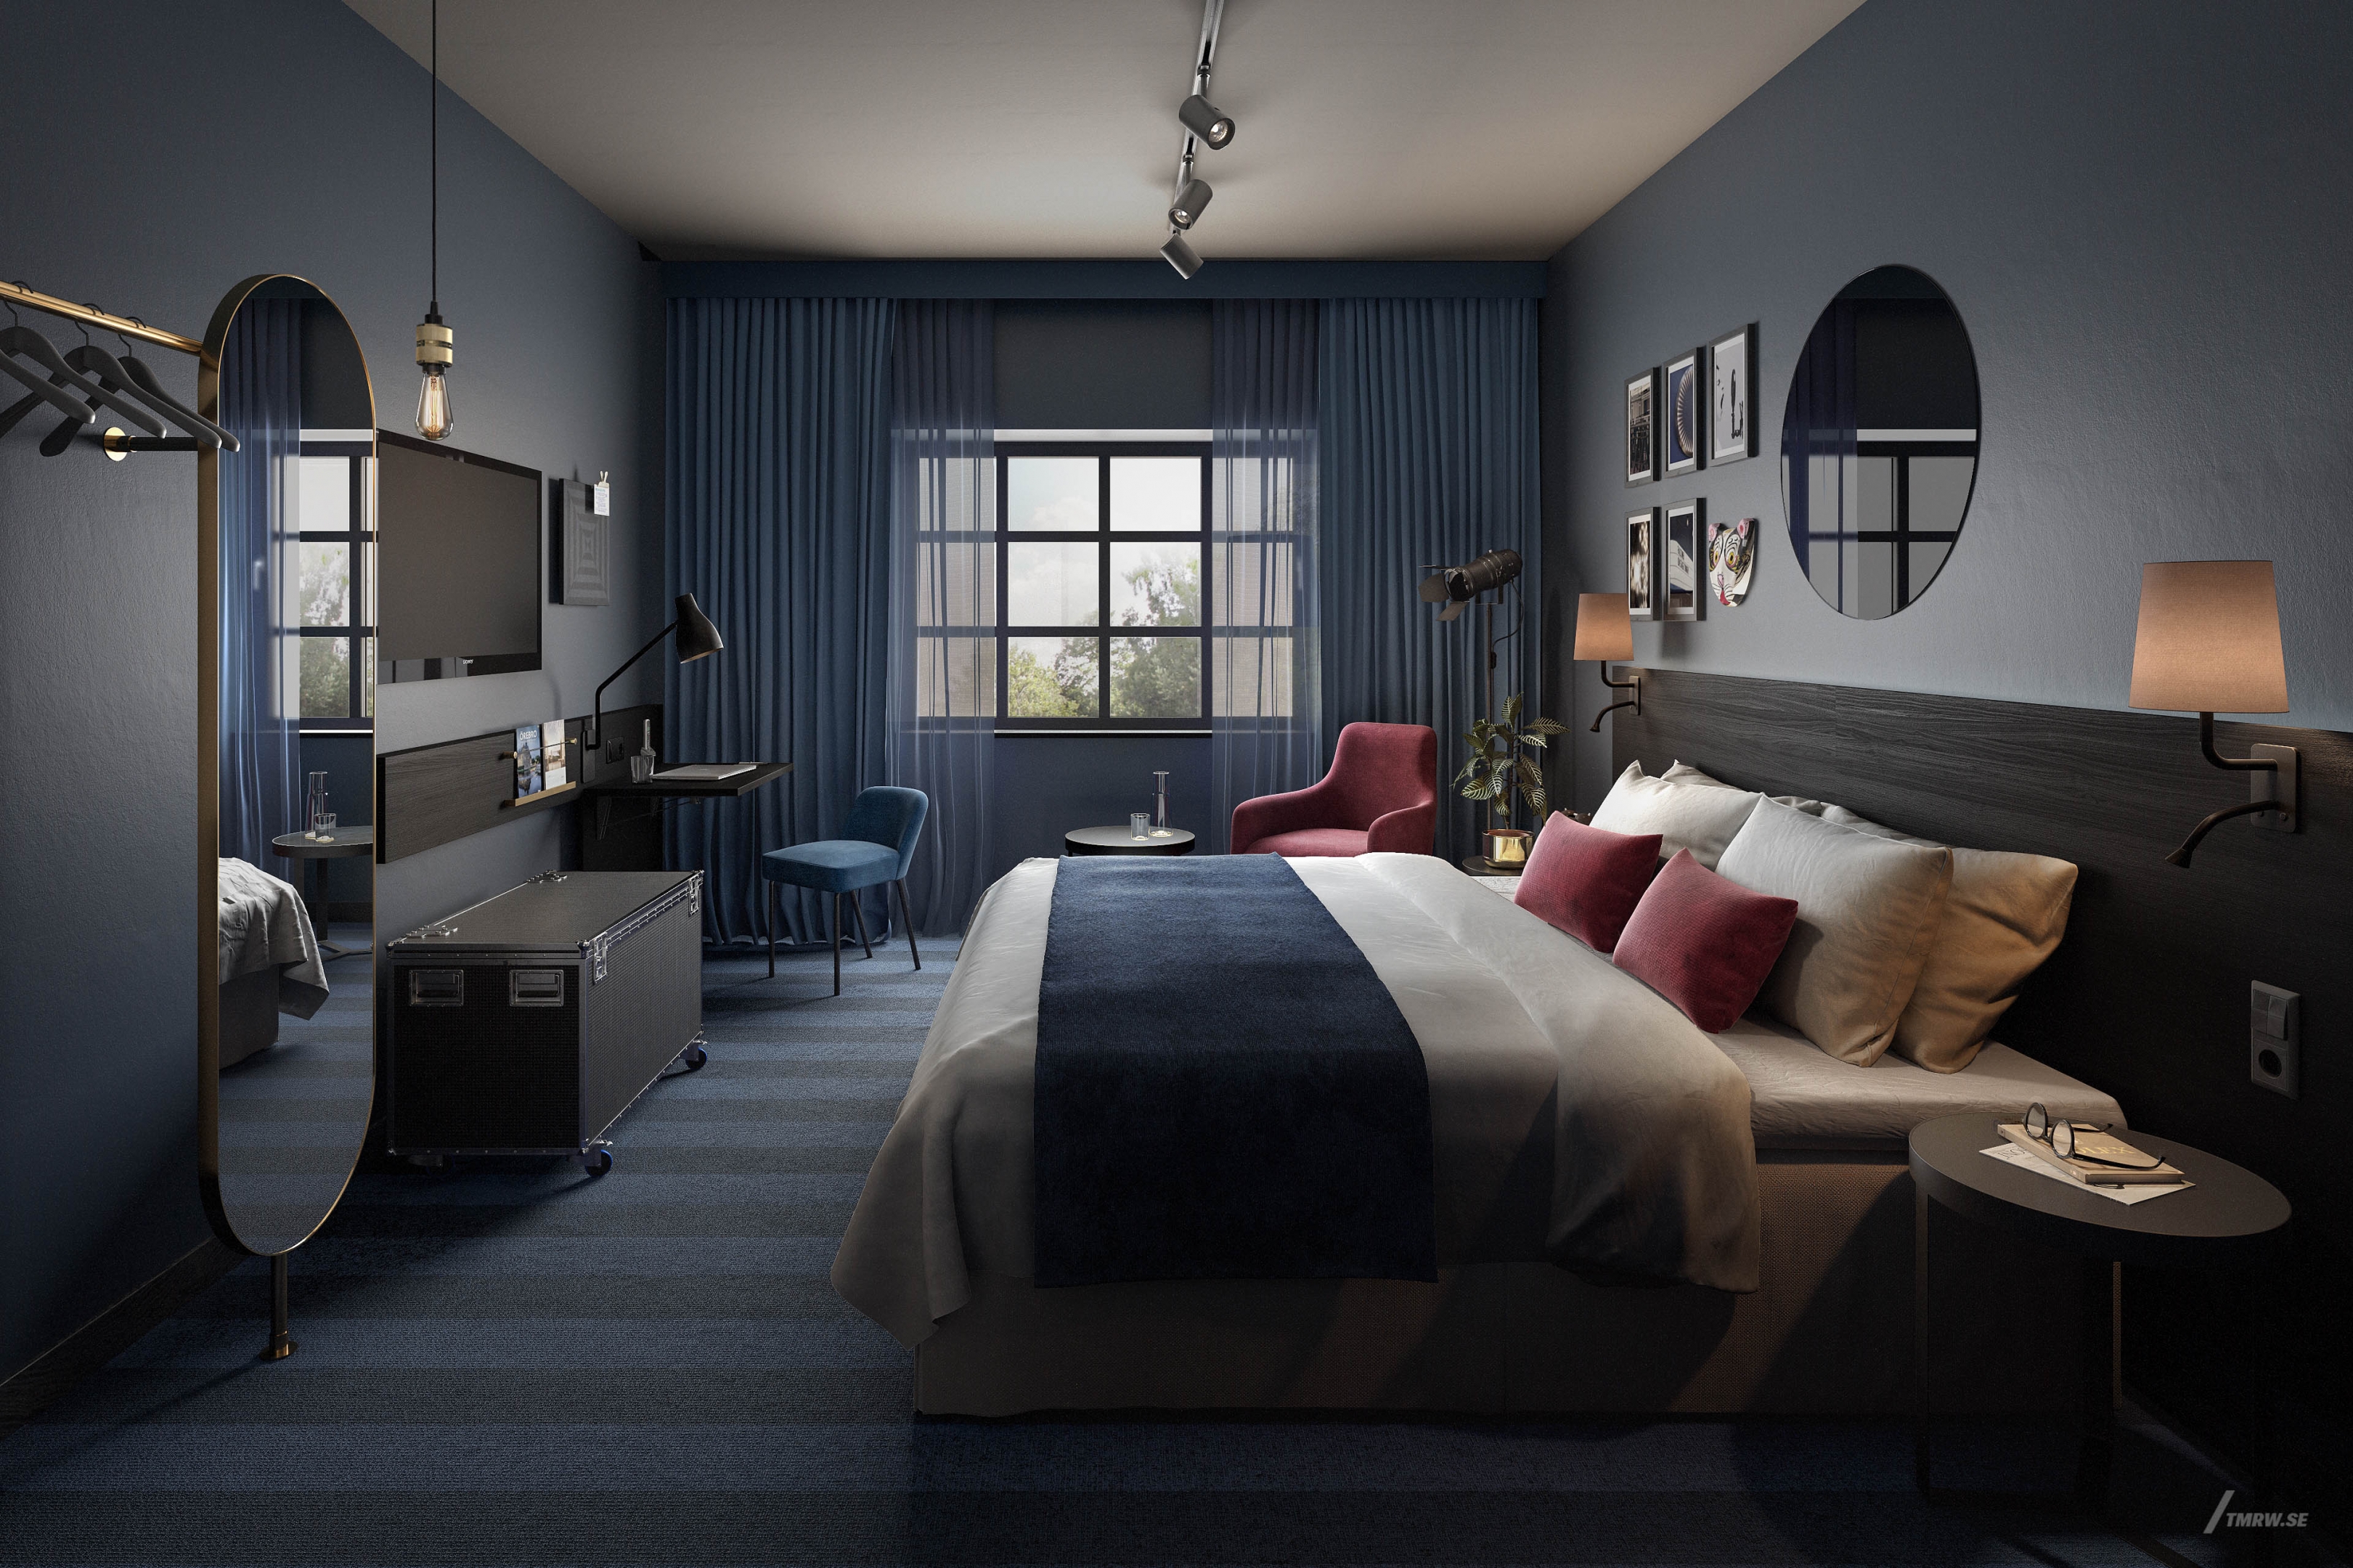 Architectural visualization of a bedroom for Doos, a bed room in evening light from an eye level view.